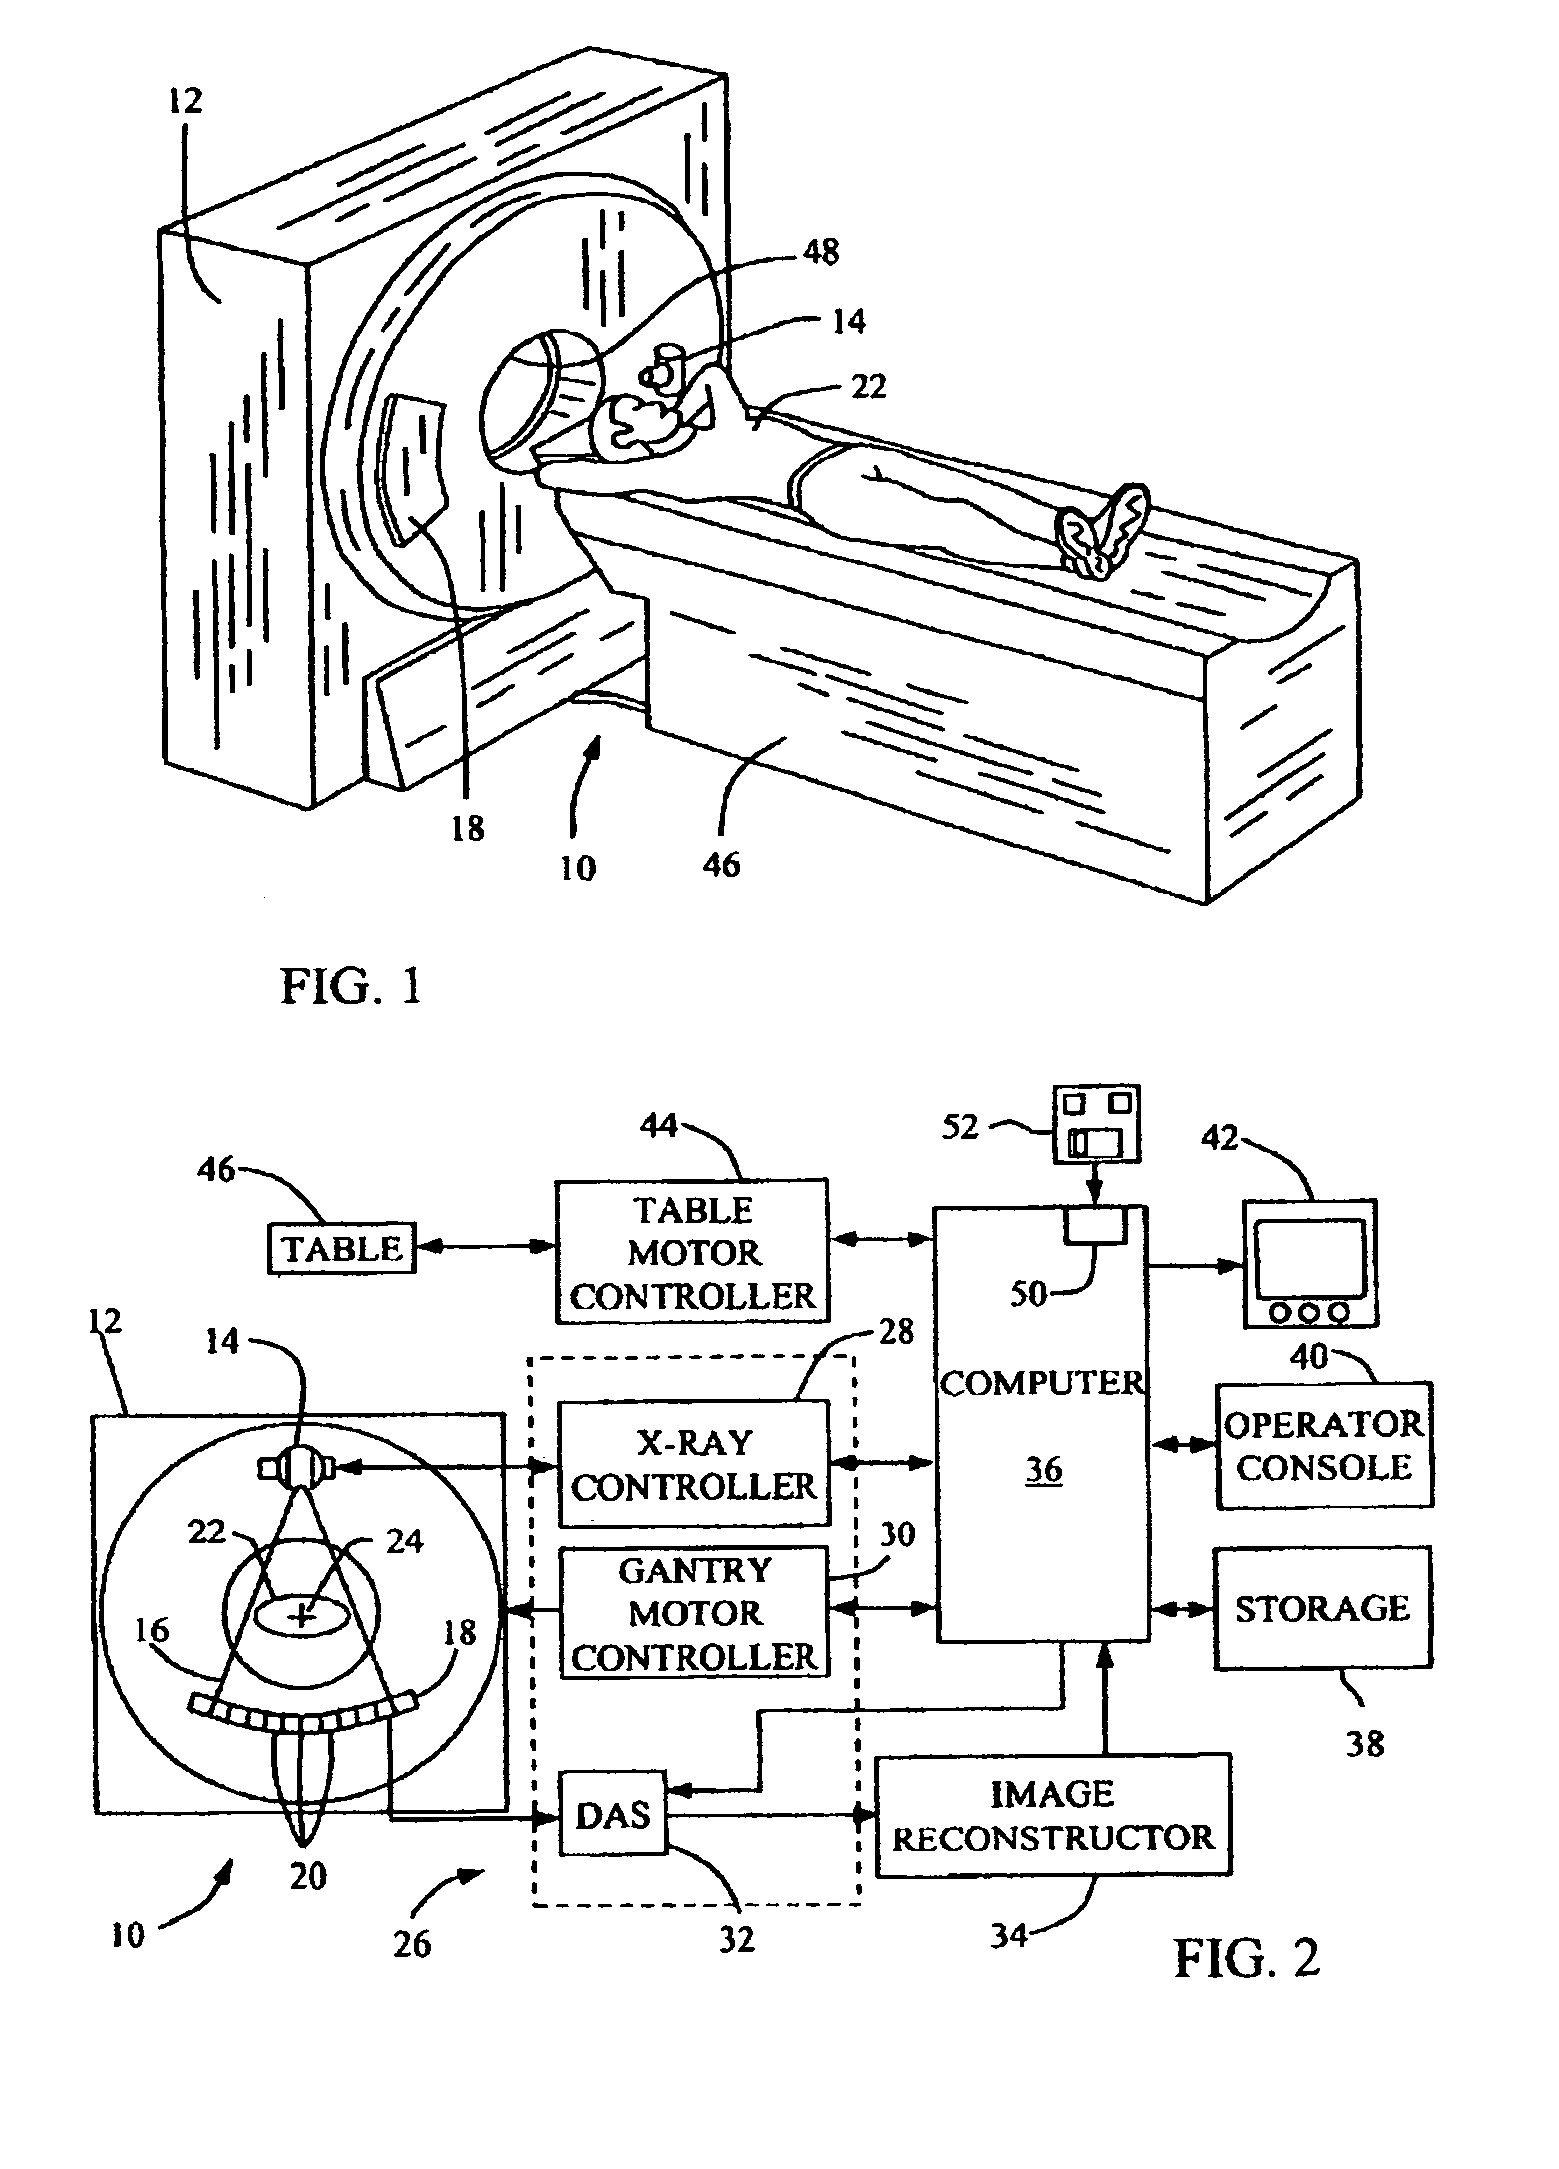 Methods and apparatus for scatter correction